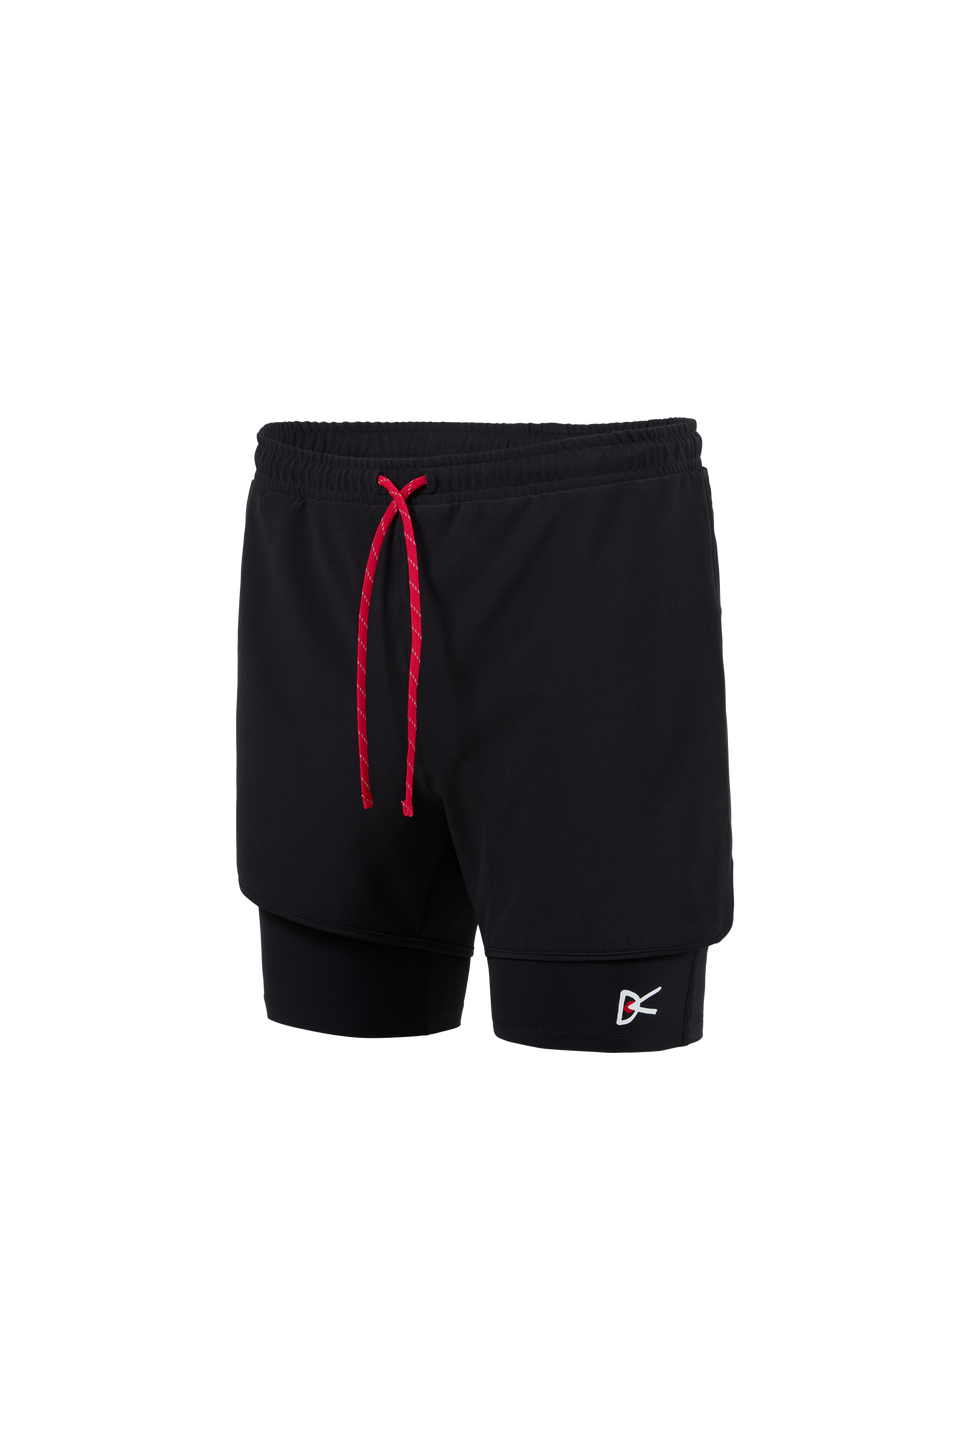 District Vision Los Angeles Trail Running FW23 Layered Pocketed Trail Shorts Black Calculus Victoria BC Canada